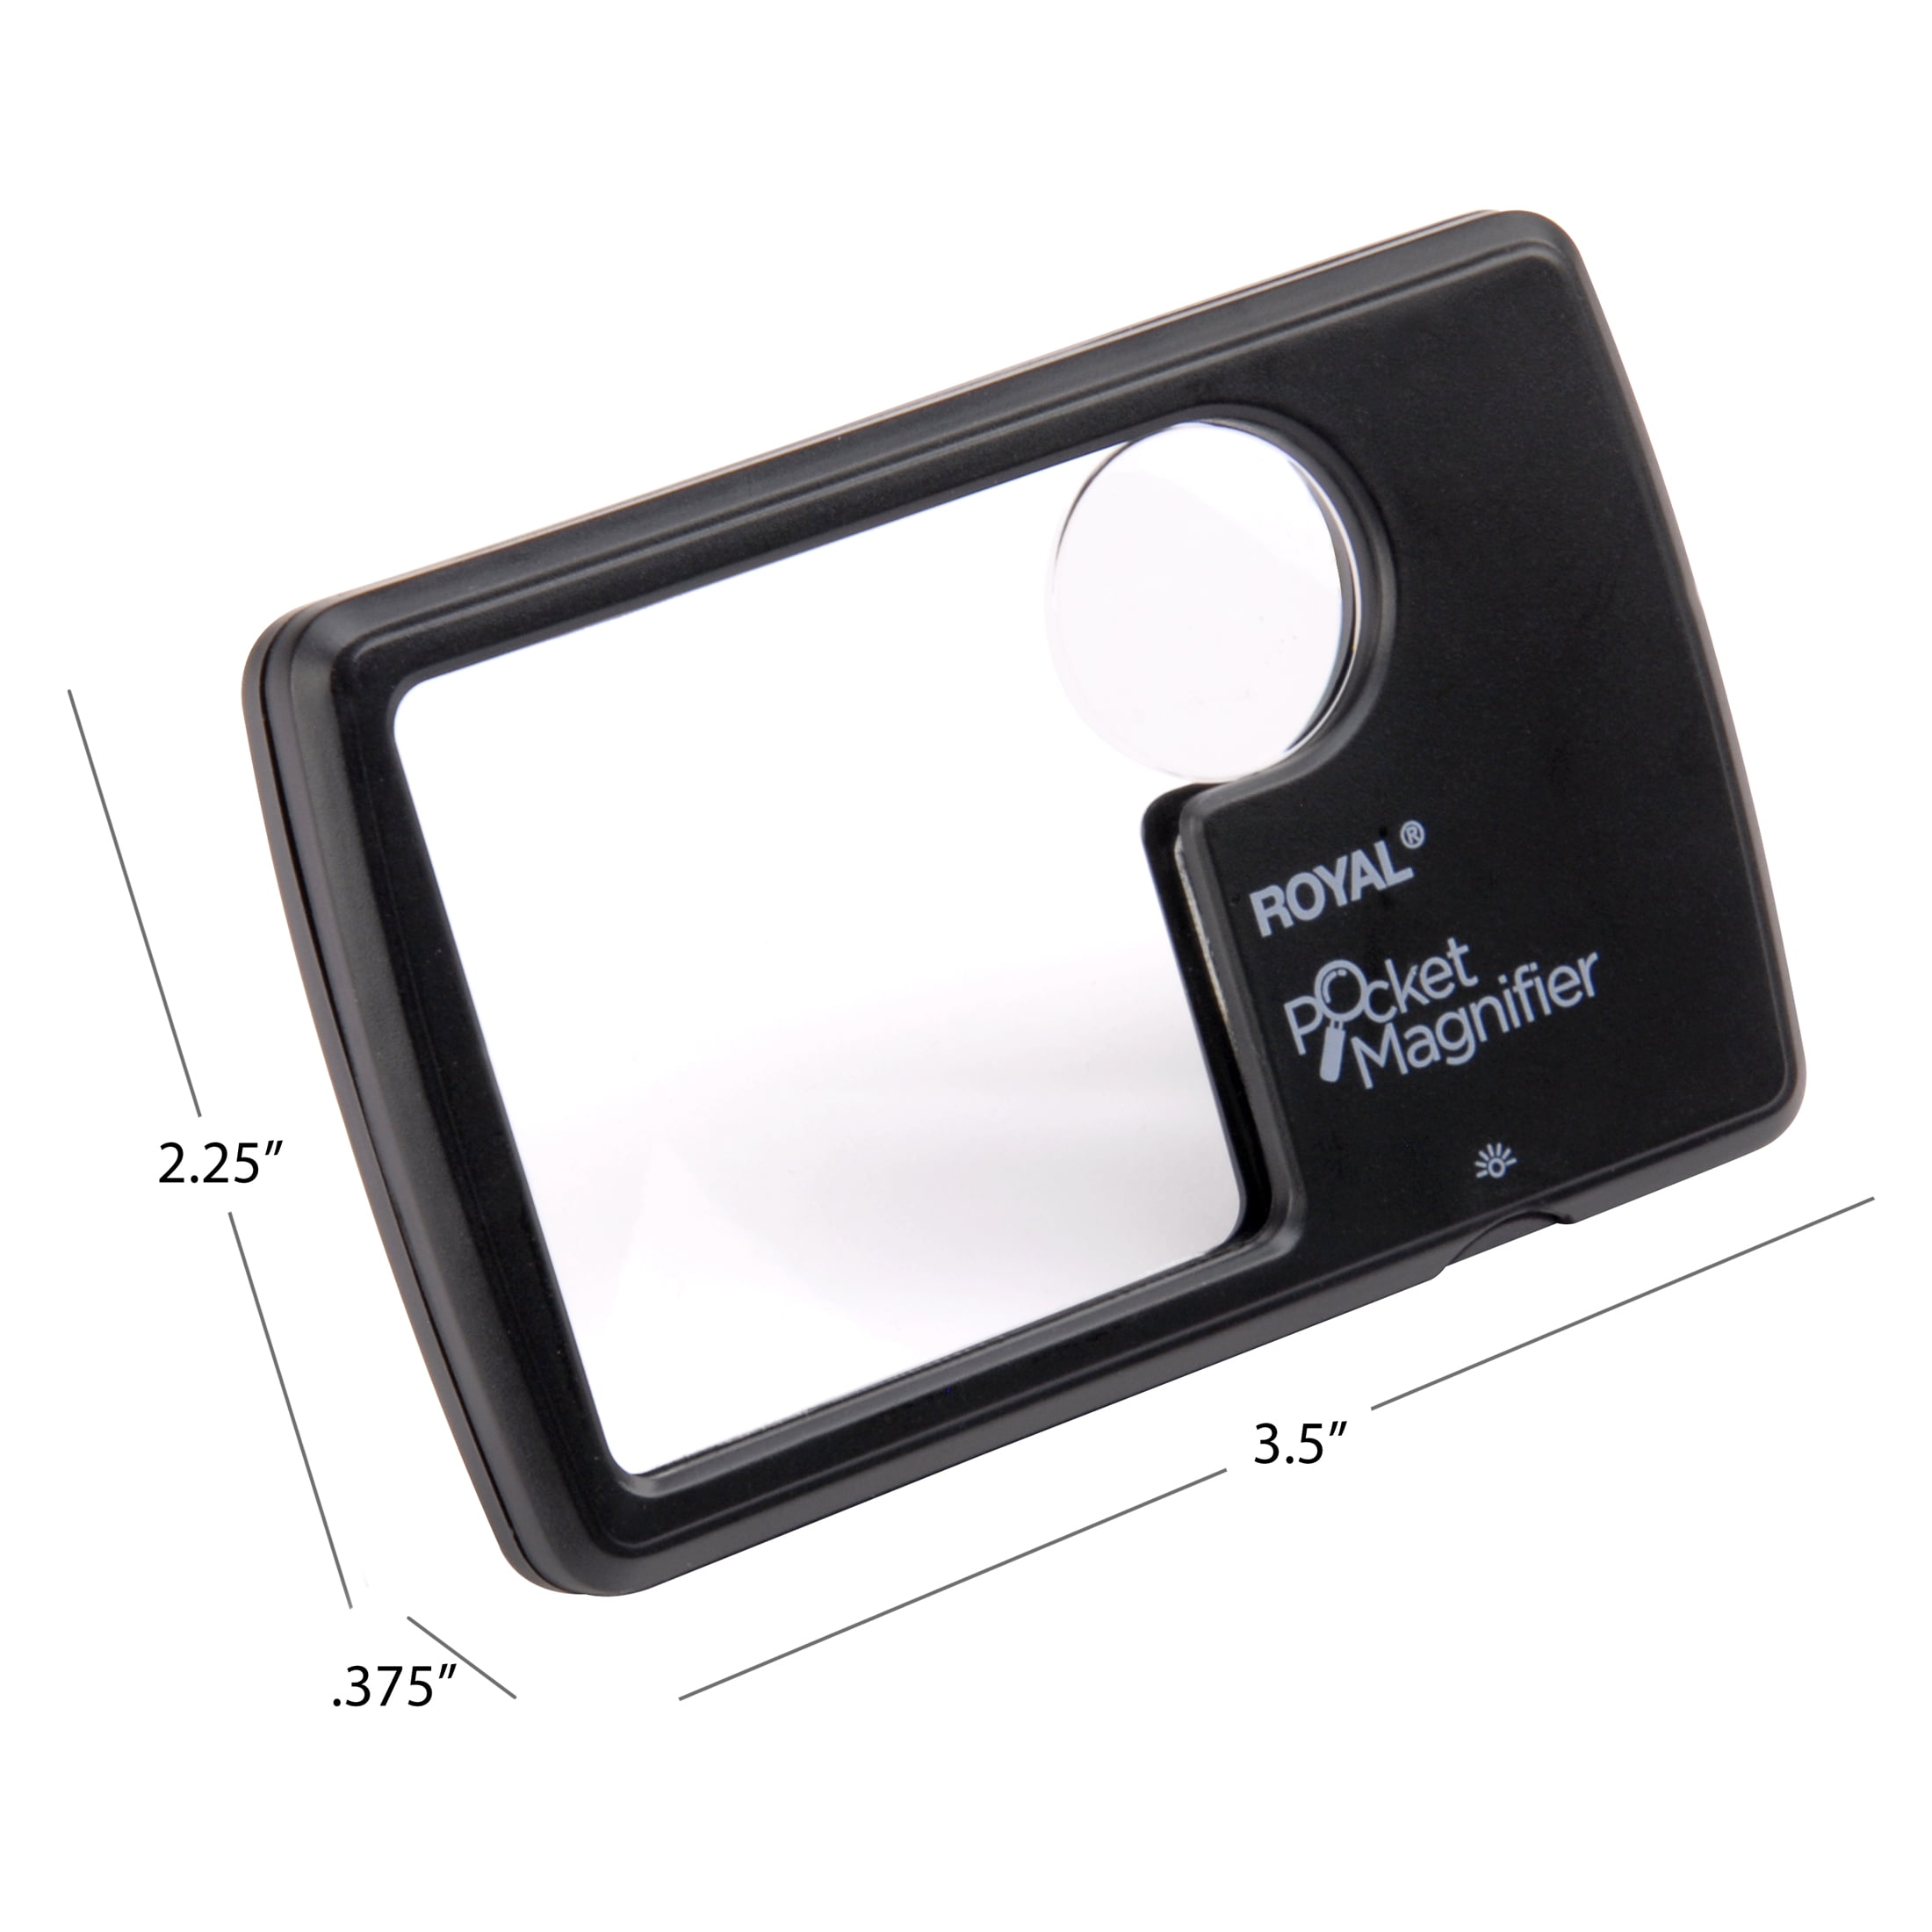 Royal SM10 Handheld 3X Illuminated Pocket Magnifier Scratch Resistant, Pack  of 2